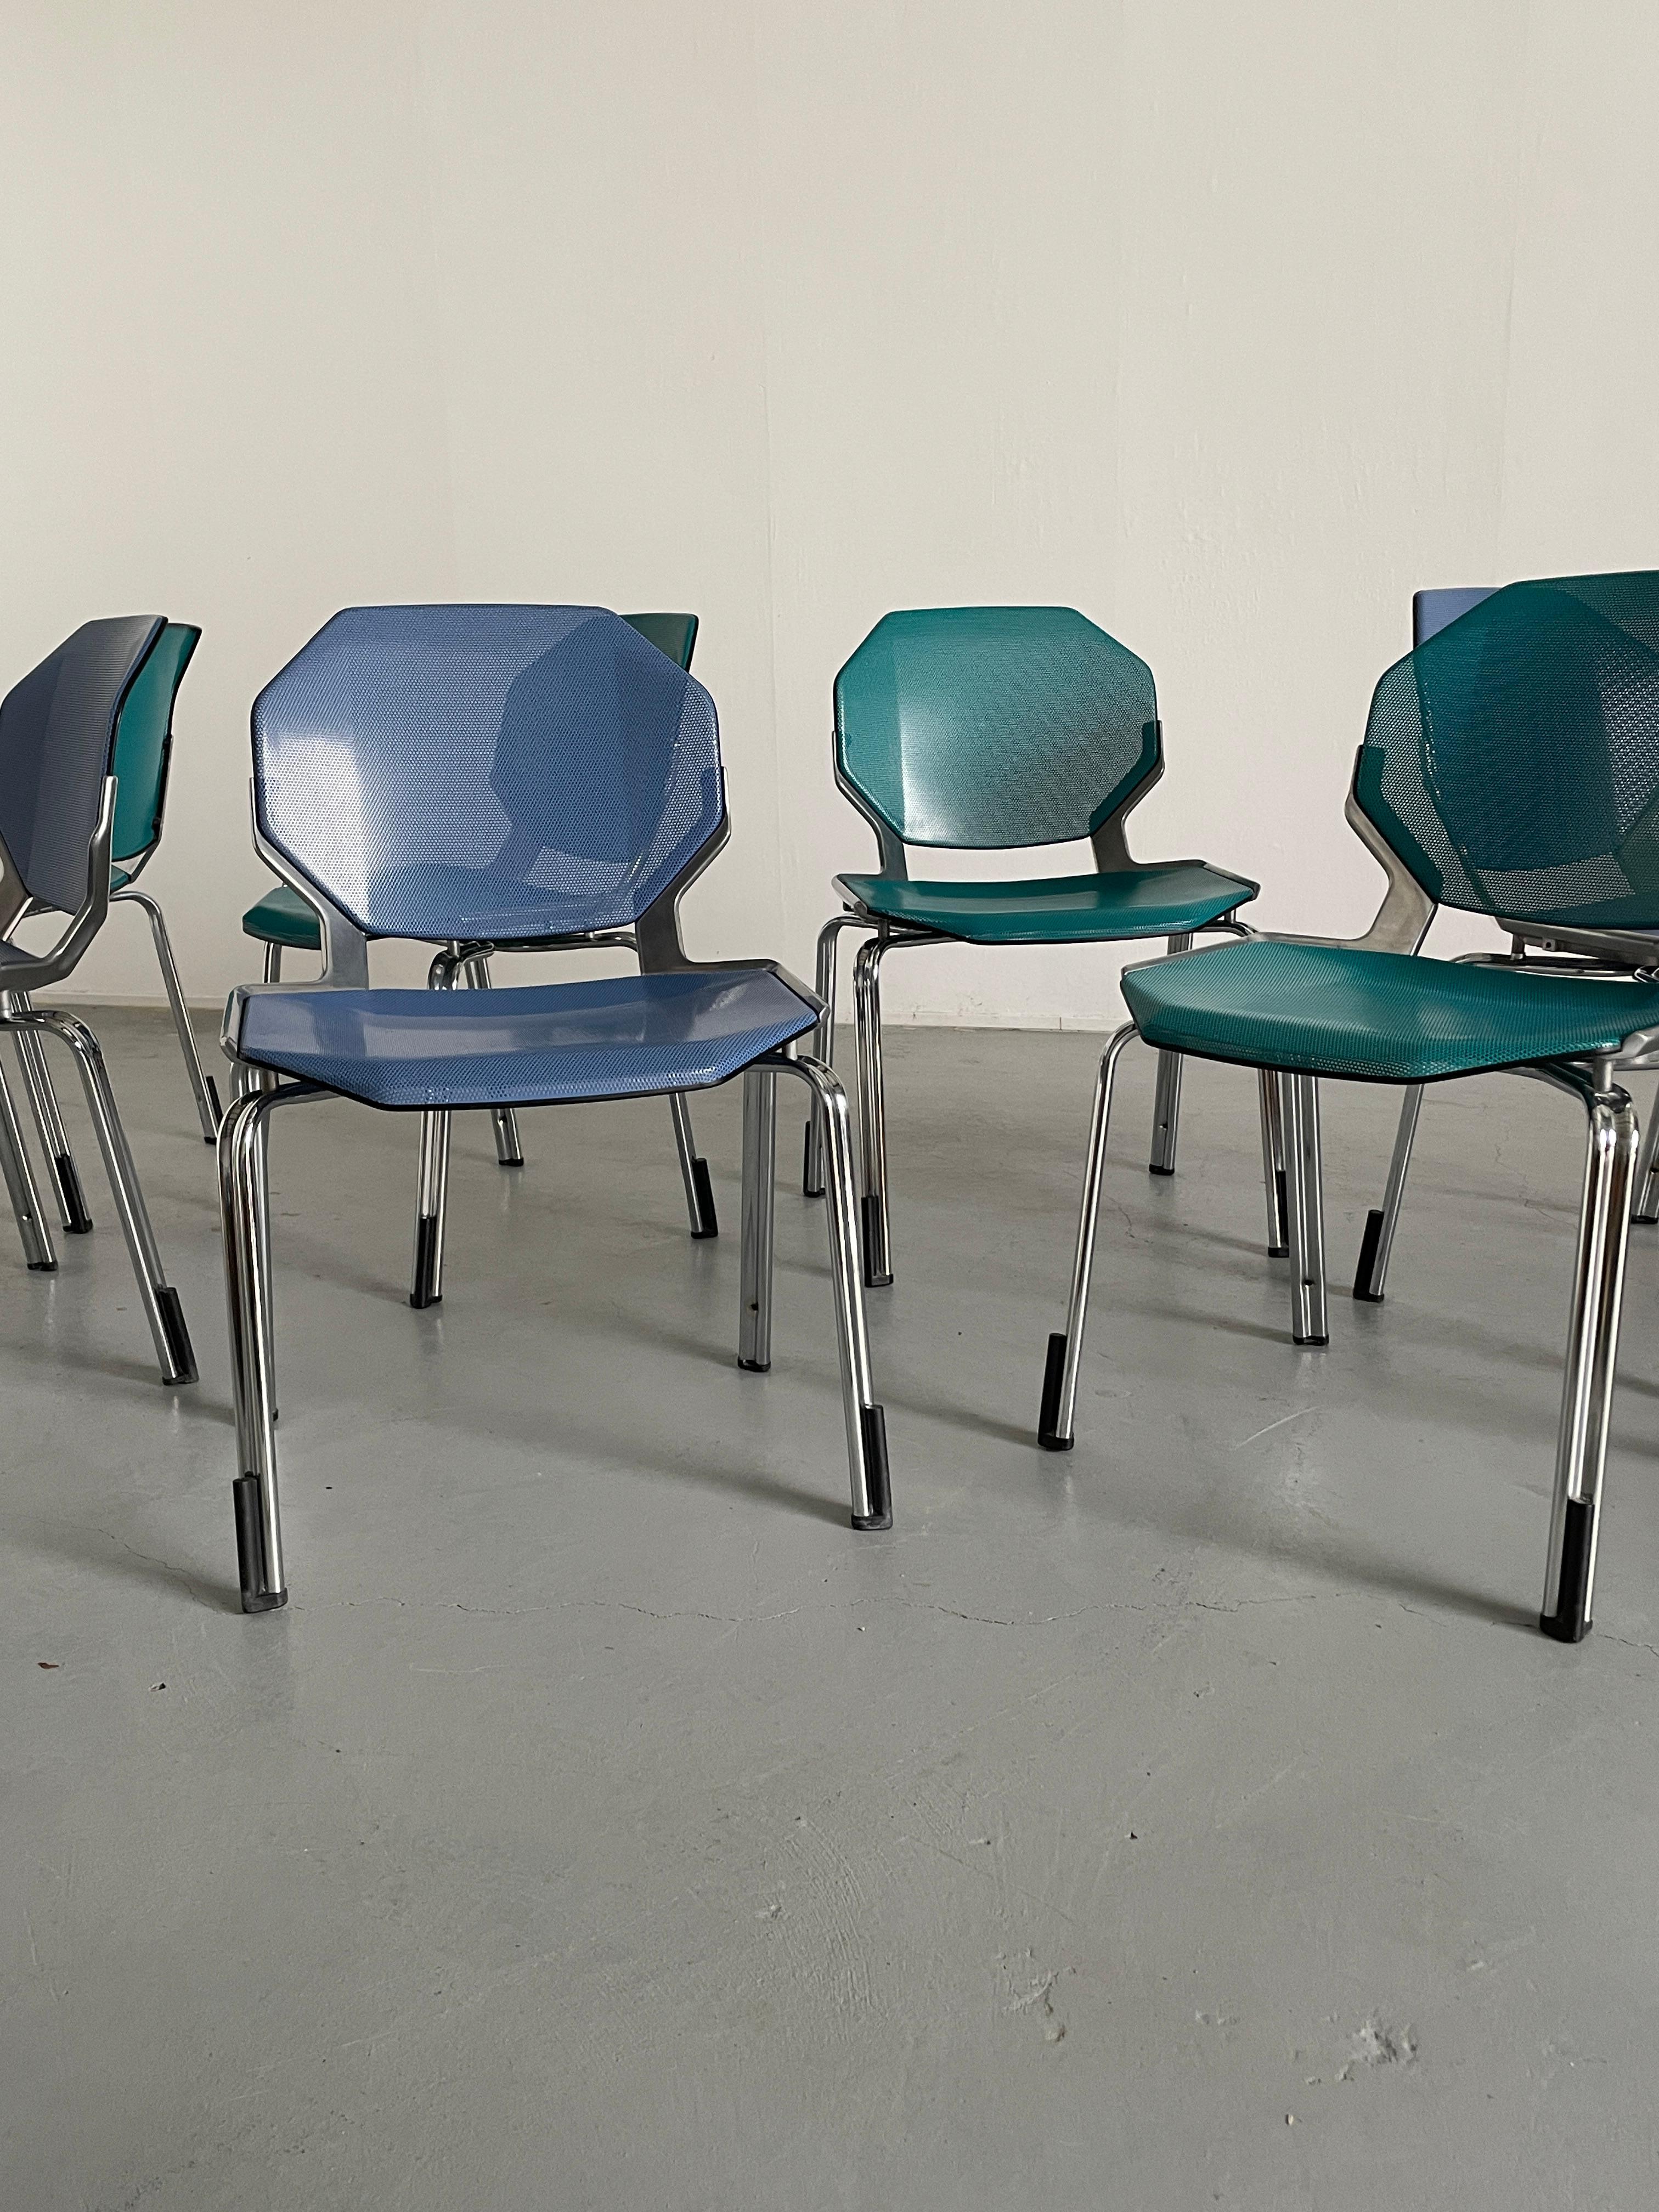 Space Age Futuristic Octagonal Stackable Dining Chairs by Fröscher Sitform, 90s For Sale 11